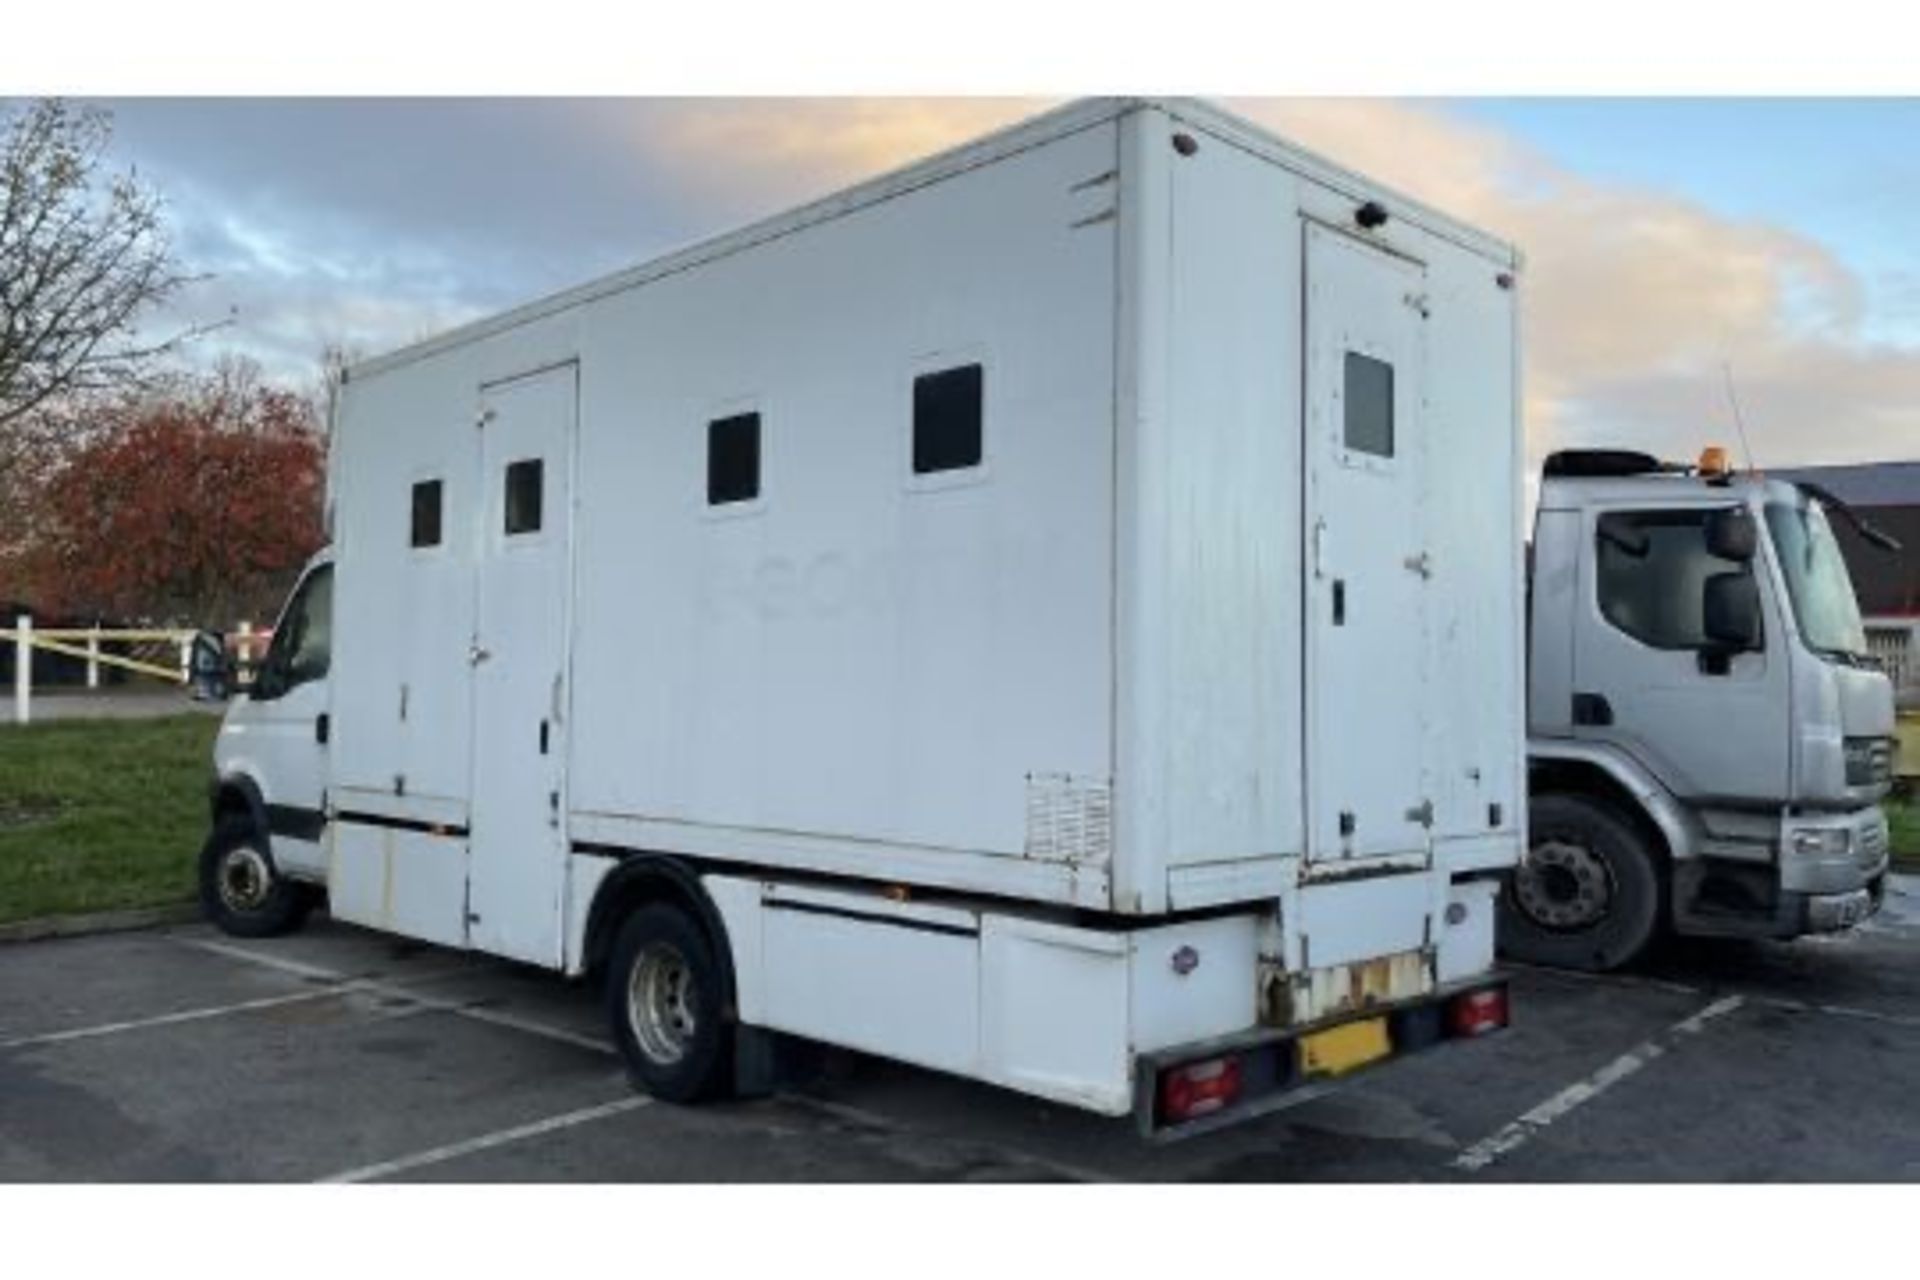 BX11 TCZ. 2011 IVECO DAILY 70C17. BOX VAN. 4X2. DIESEL MANUAL GEARBOX. REAR VIEW CAMERA 6 X SPEED - Image 5 of 24